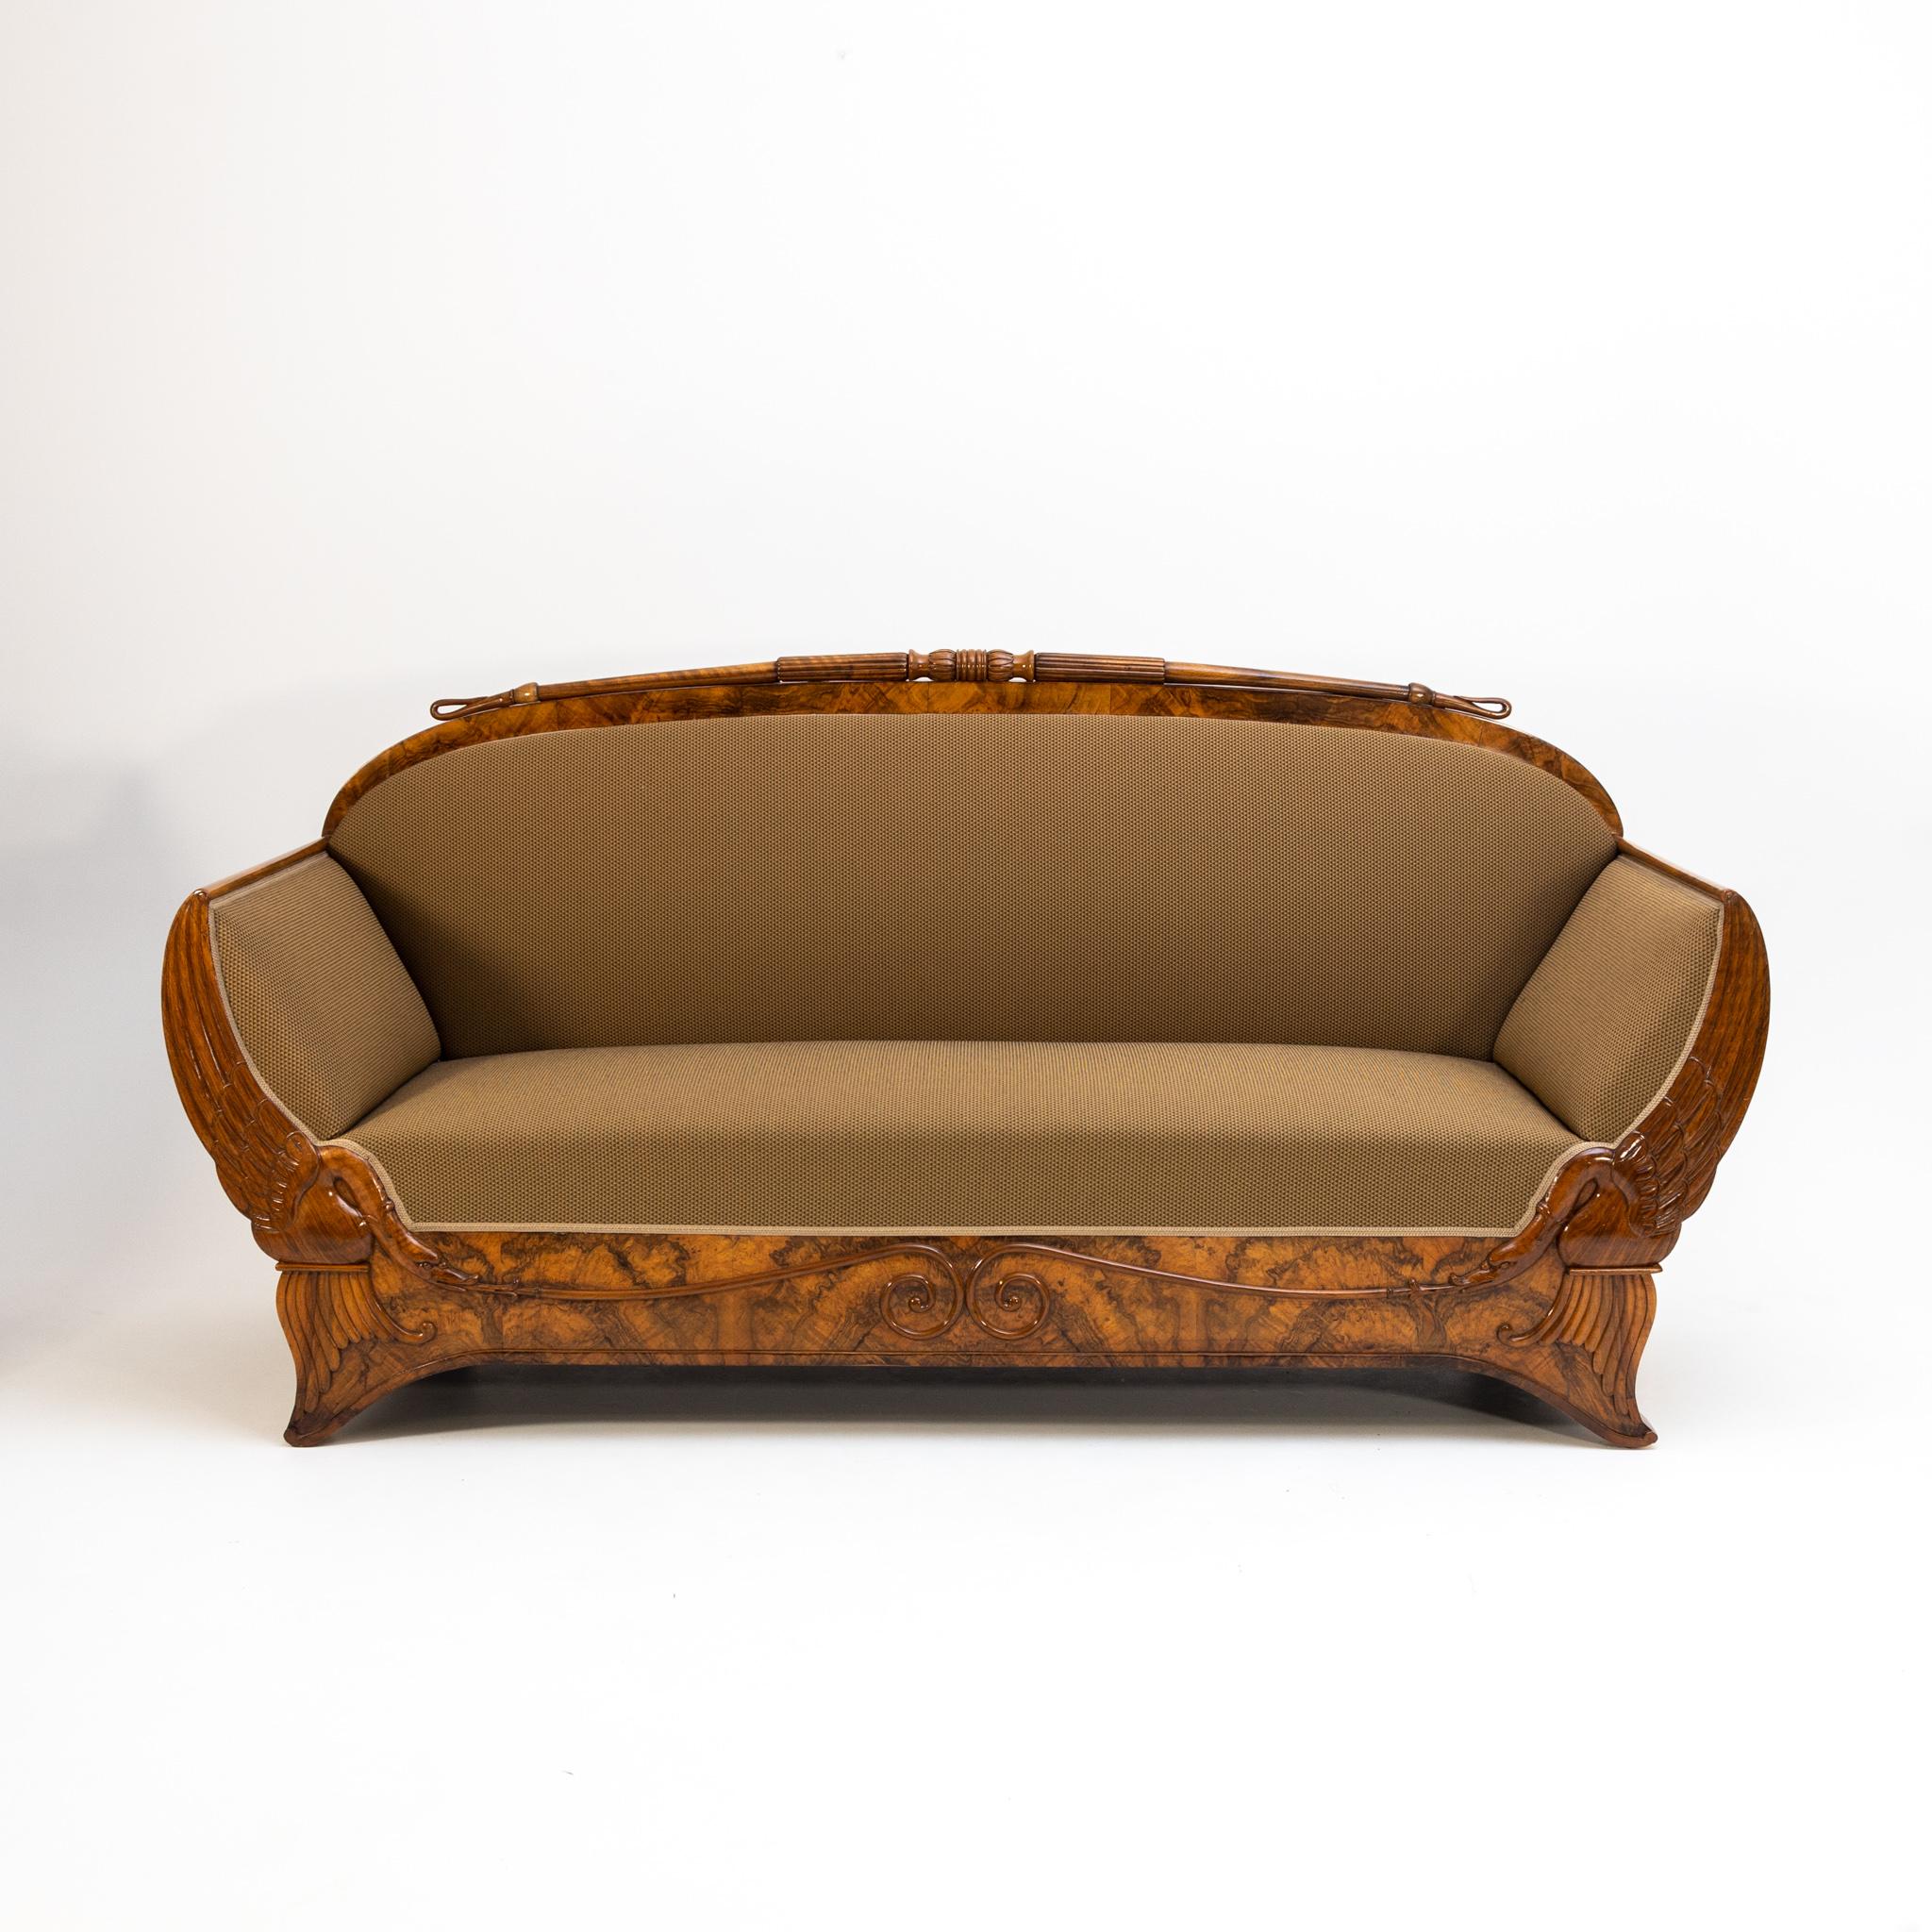 Biedermeier sofa, veneered in walnut with carved swan decorations. The sofa has been reupholstered and professionally restored.